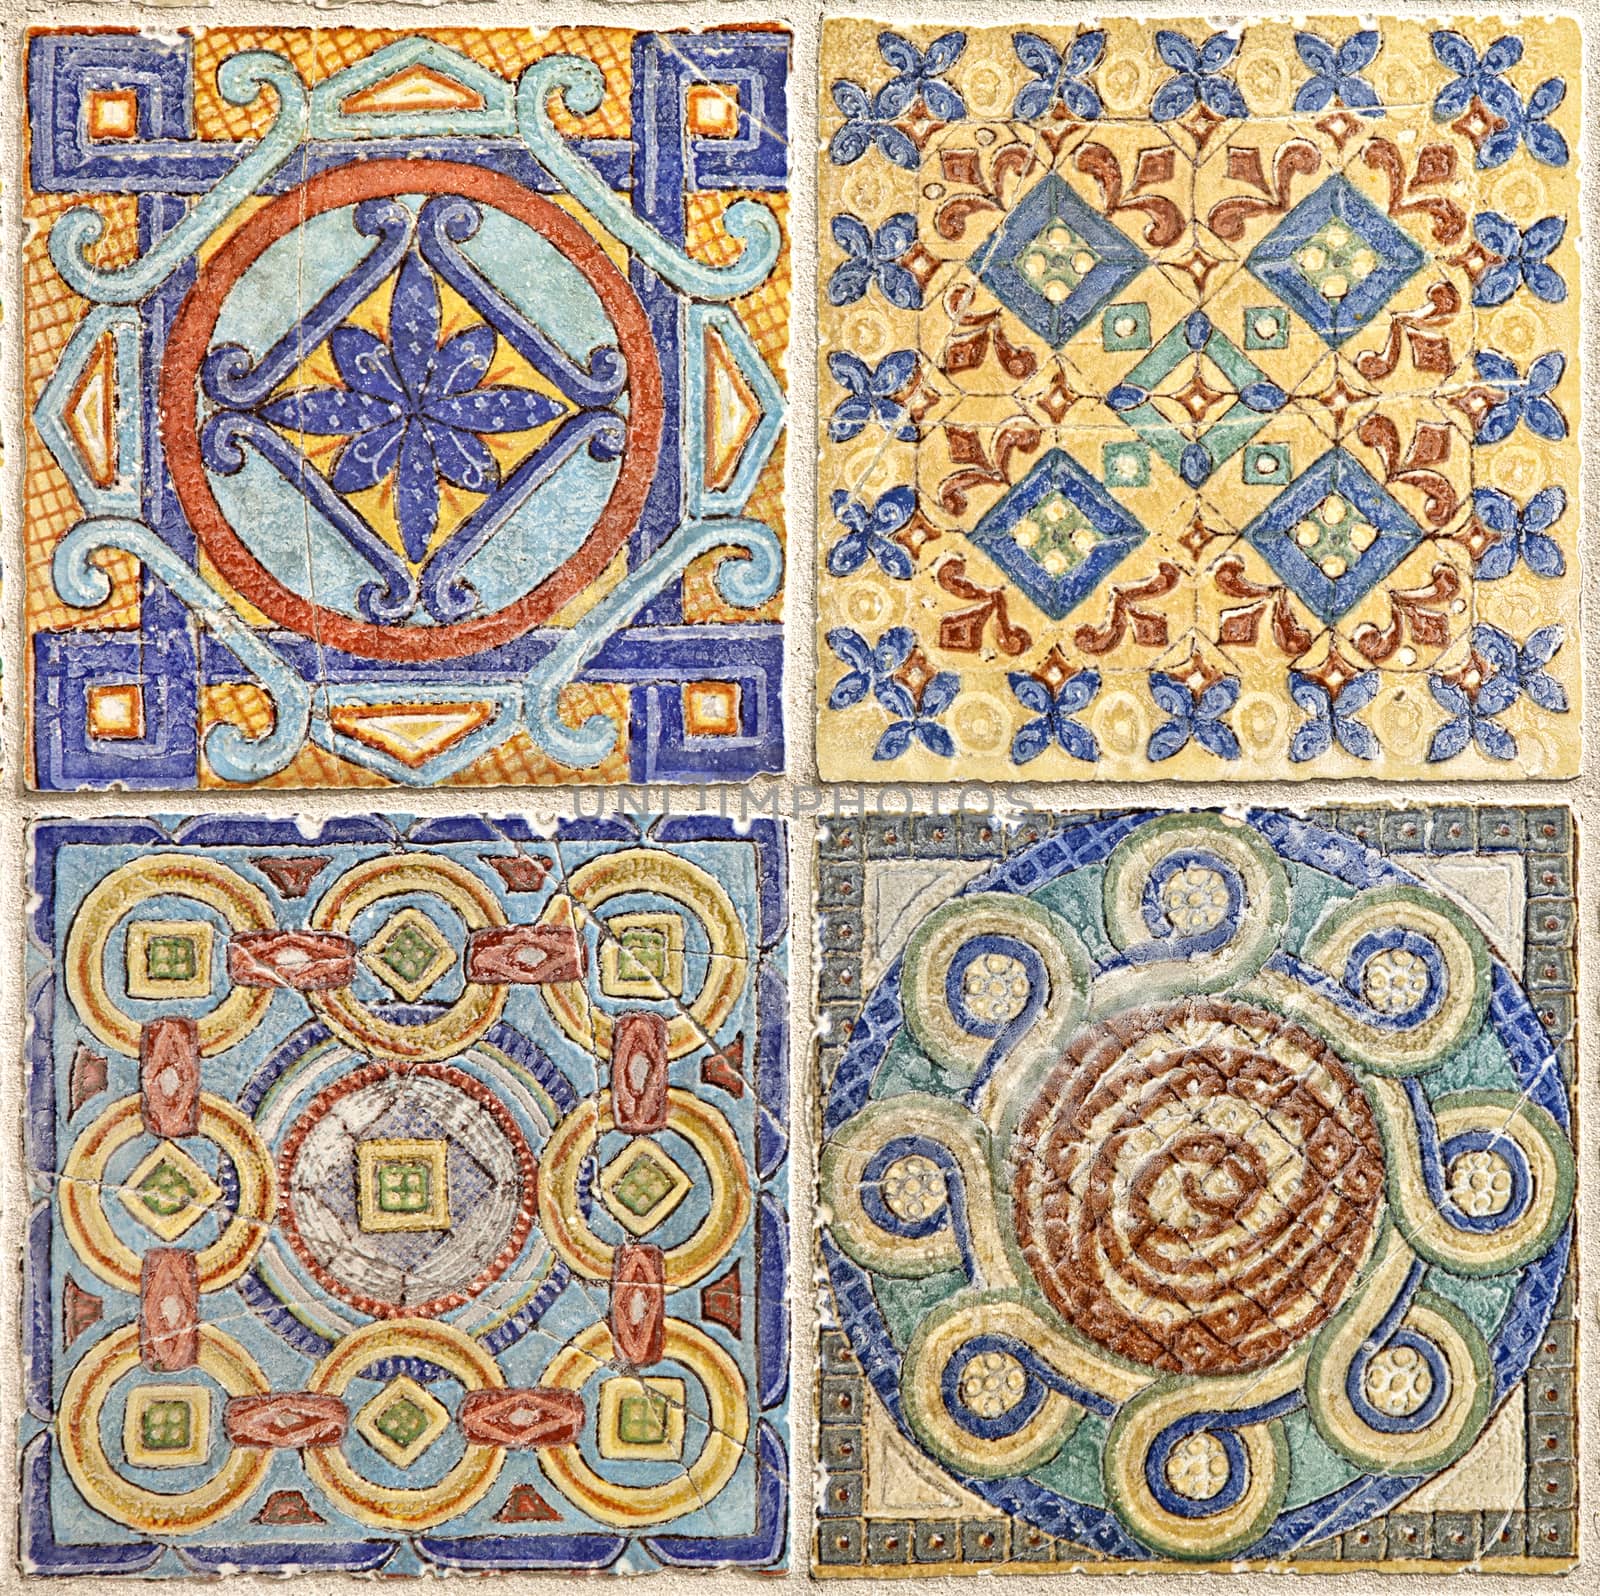 Colorful set of ornamental tiles from Portugal